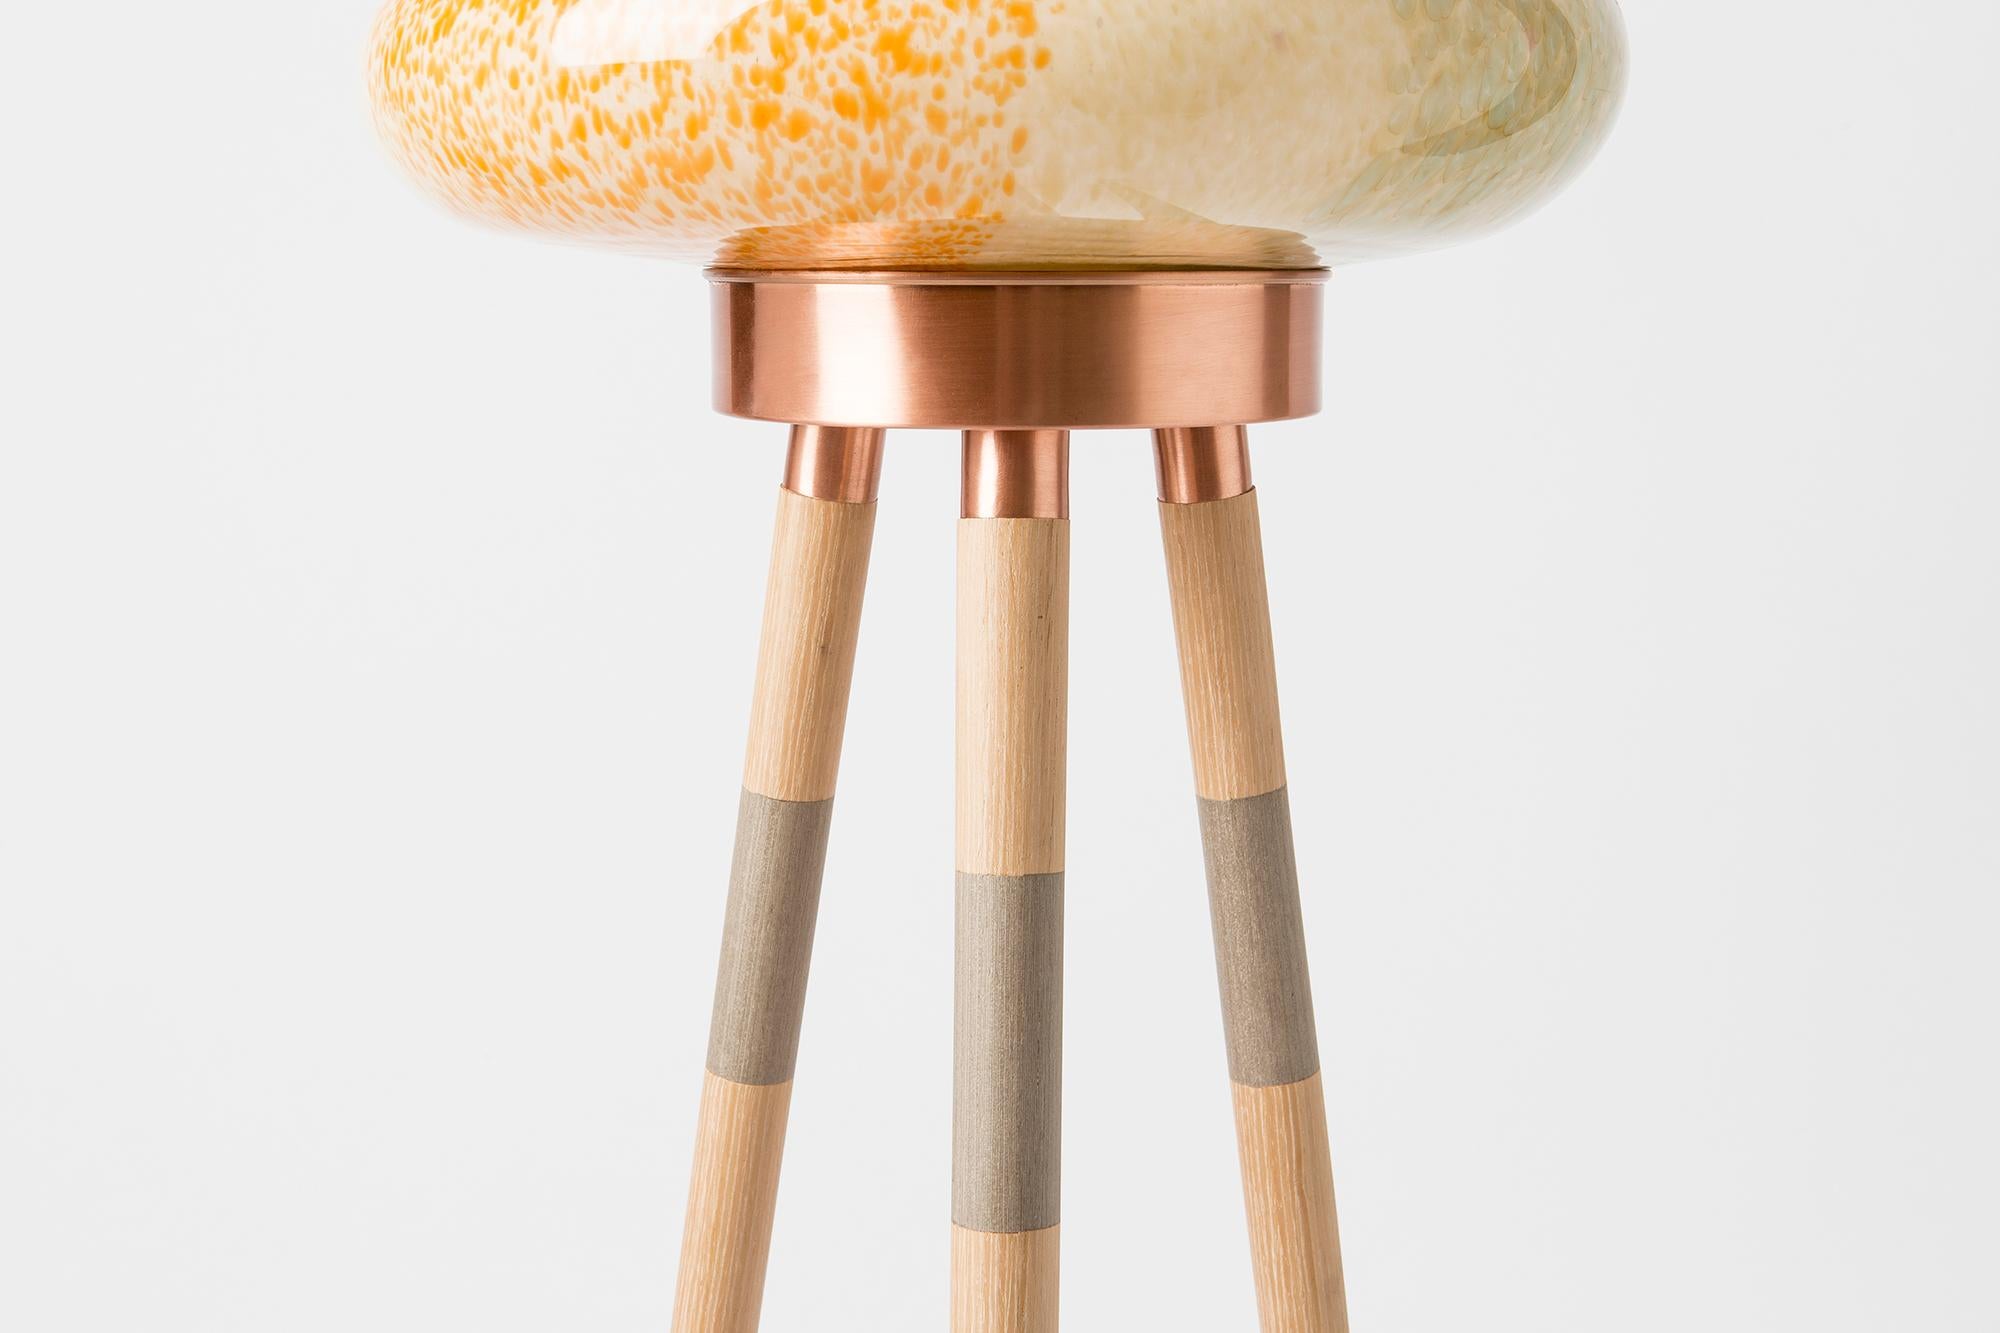 Hand-Crafted Contemporary Handblown Glass Colmena Floor Lamp with Wooden Legs For Sale